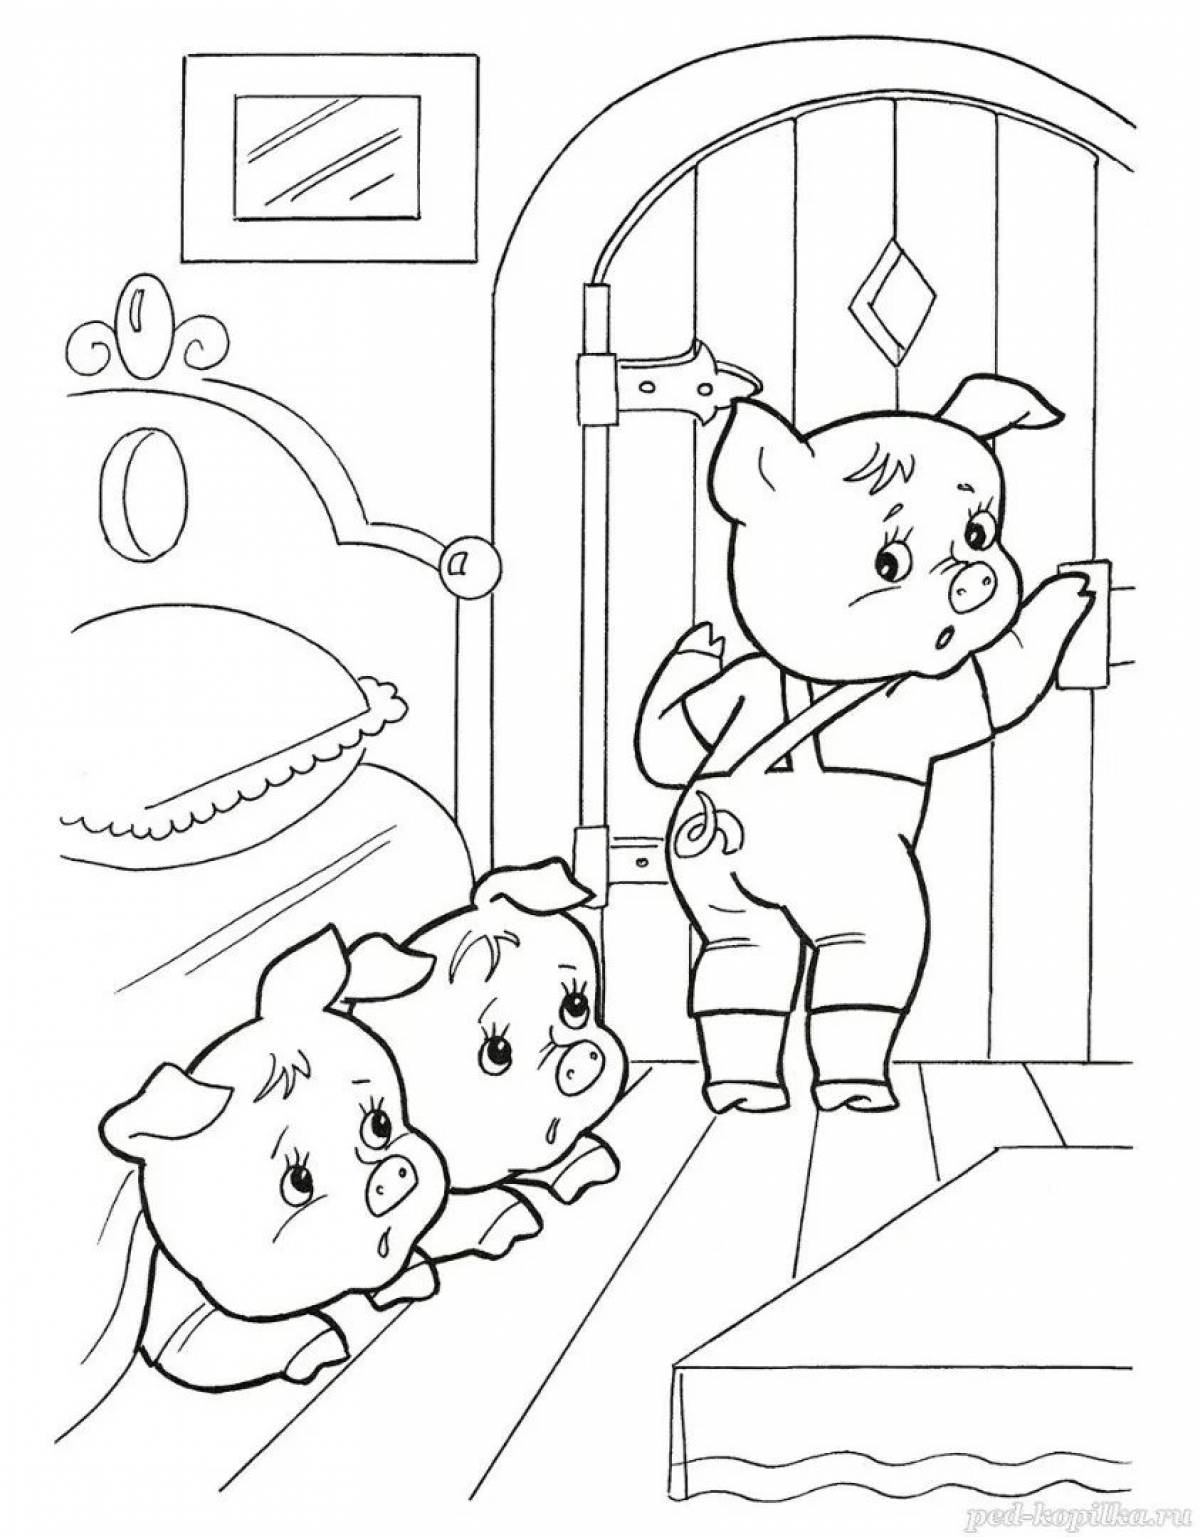 3 little pigs funny coloring book for kids